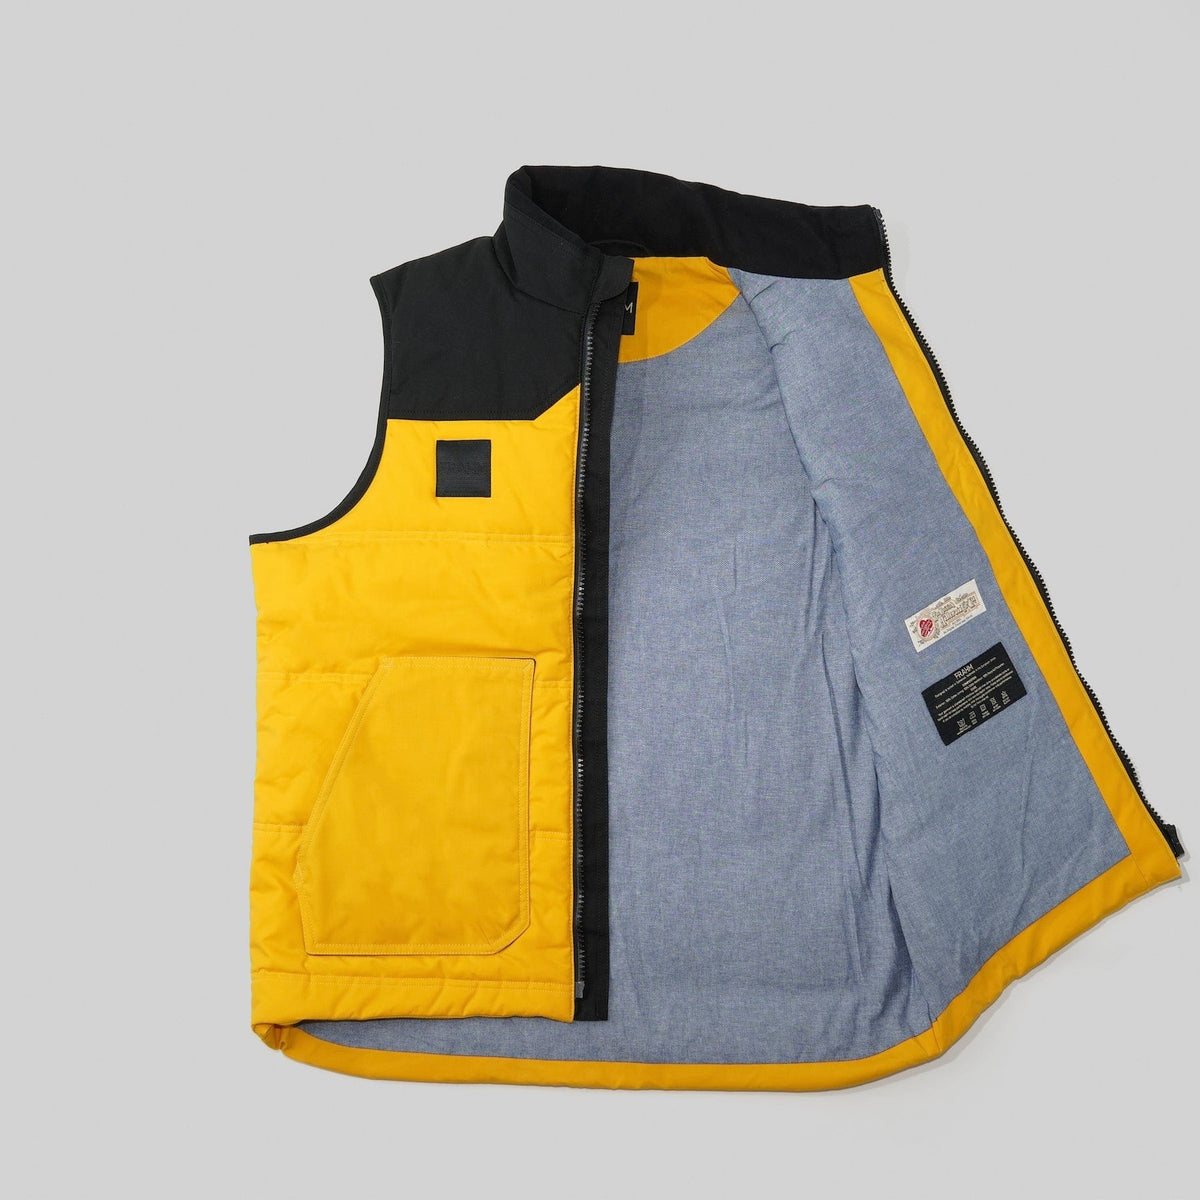 FRAHM Jacket - The new Quilted Utility Gilet is what we